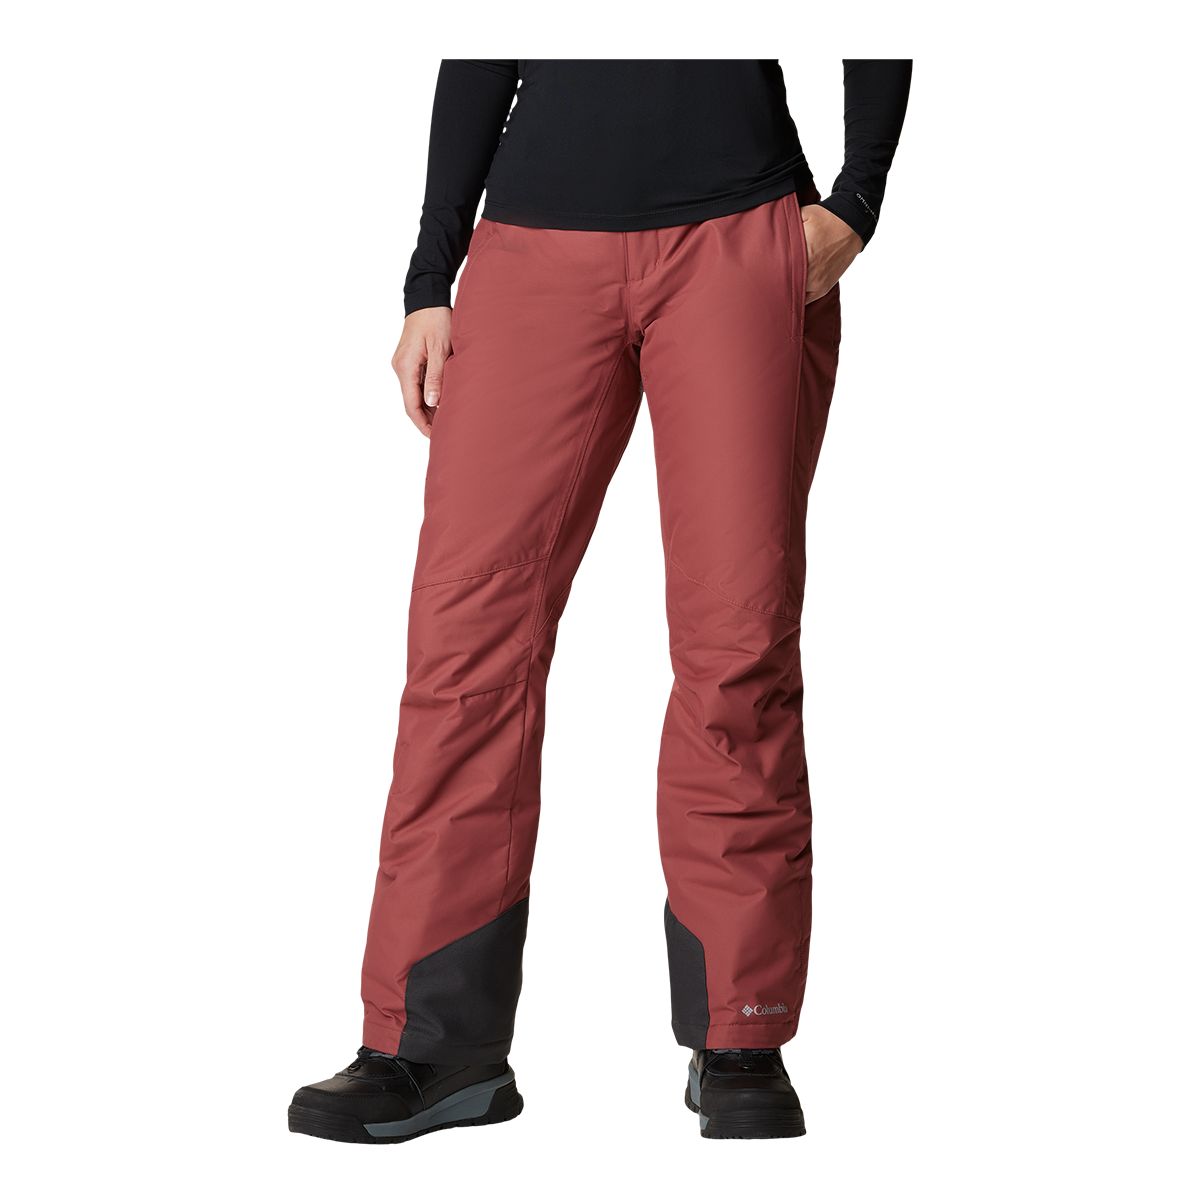 Image of Columbia Women's Bugaboo 29" Insulated Snow Pants